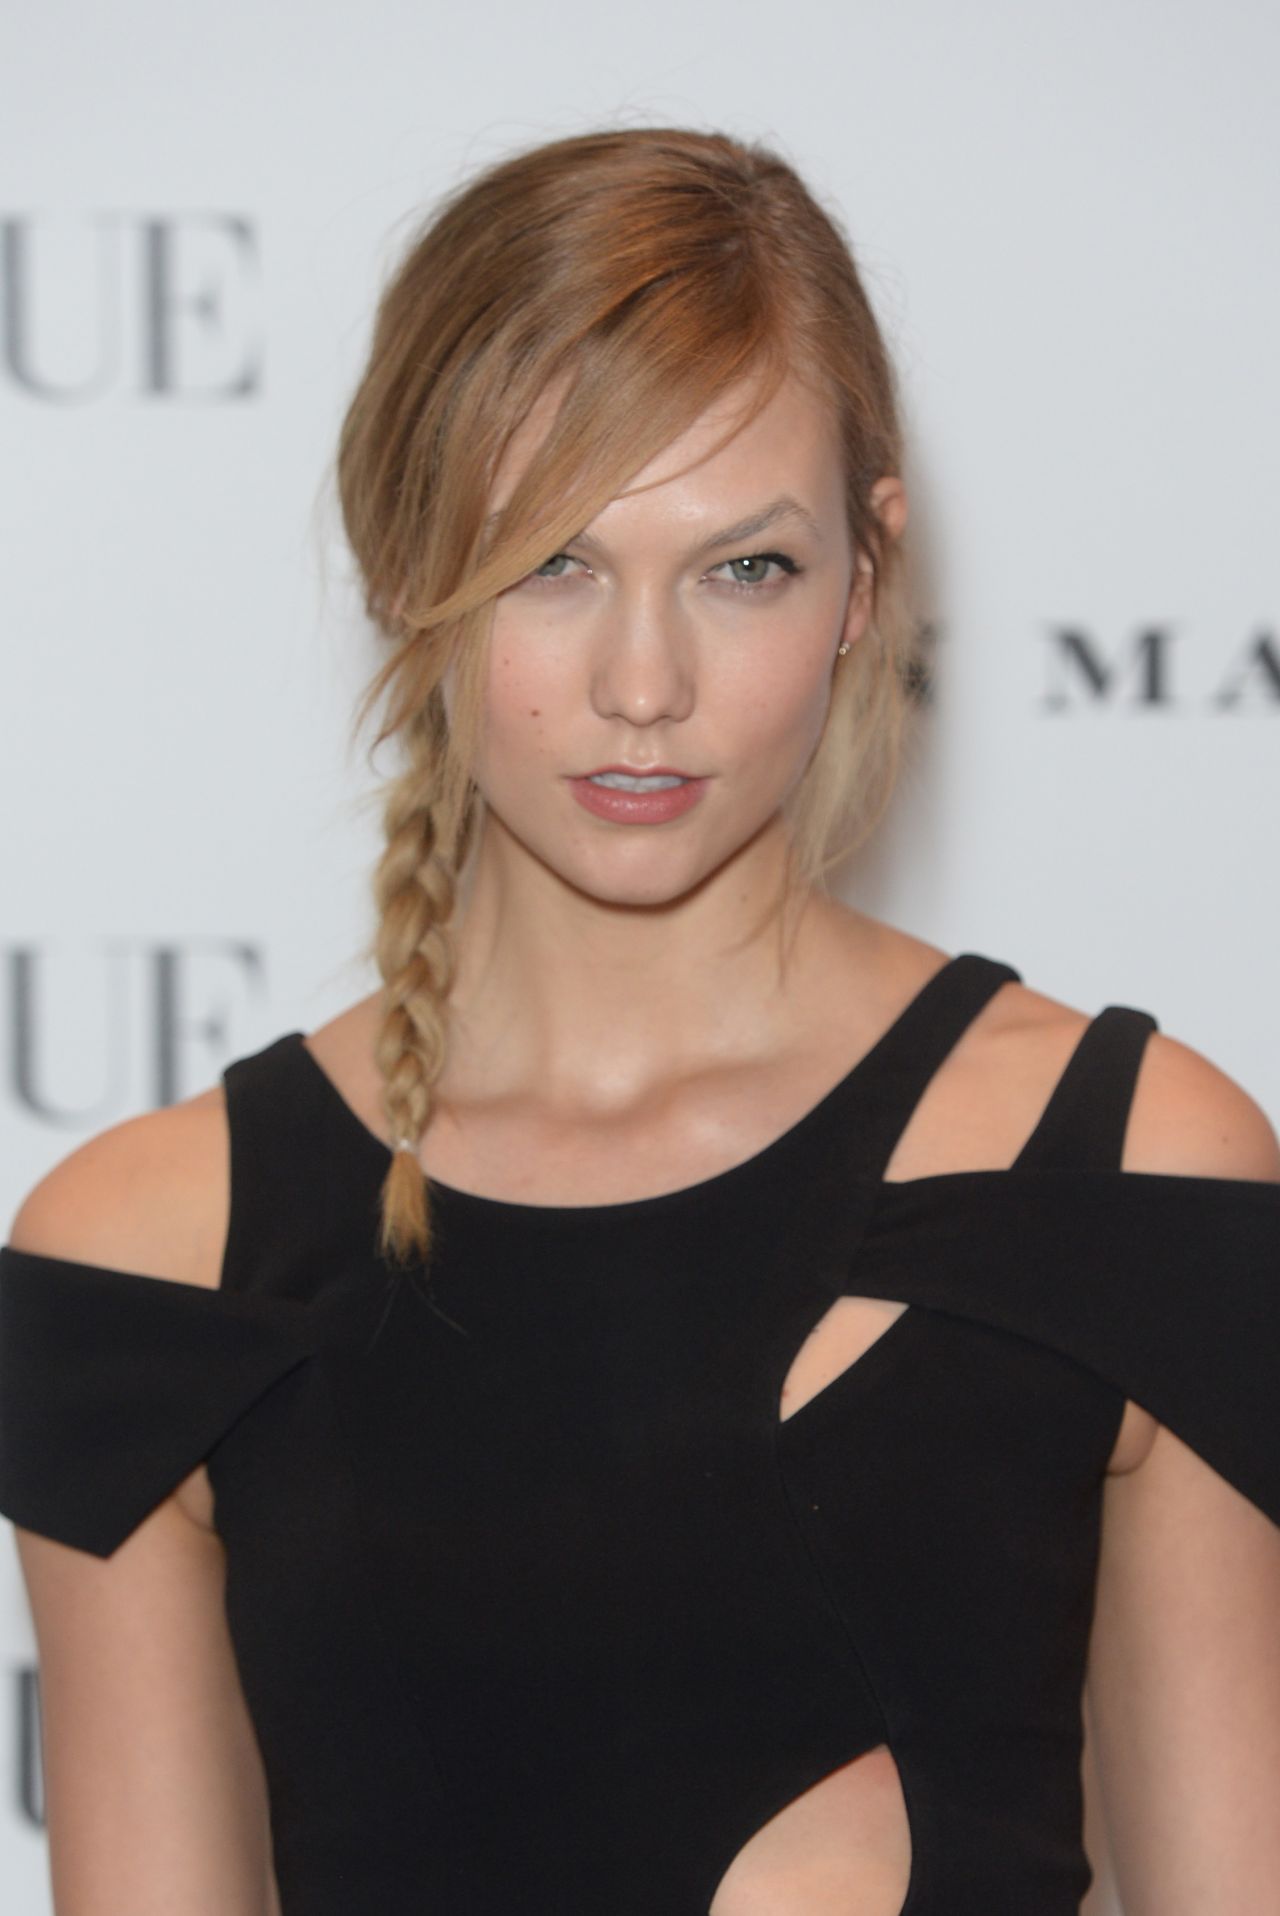 Karlie Kloss – ‘Vogue 100 – A Century of Style’ in London, February 9, 2016